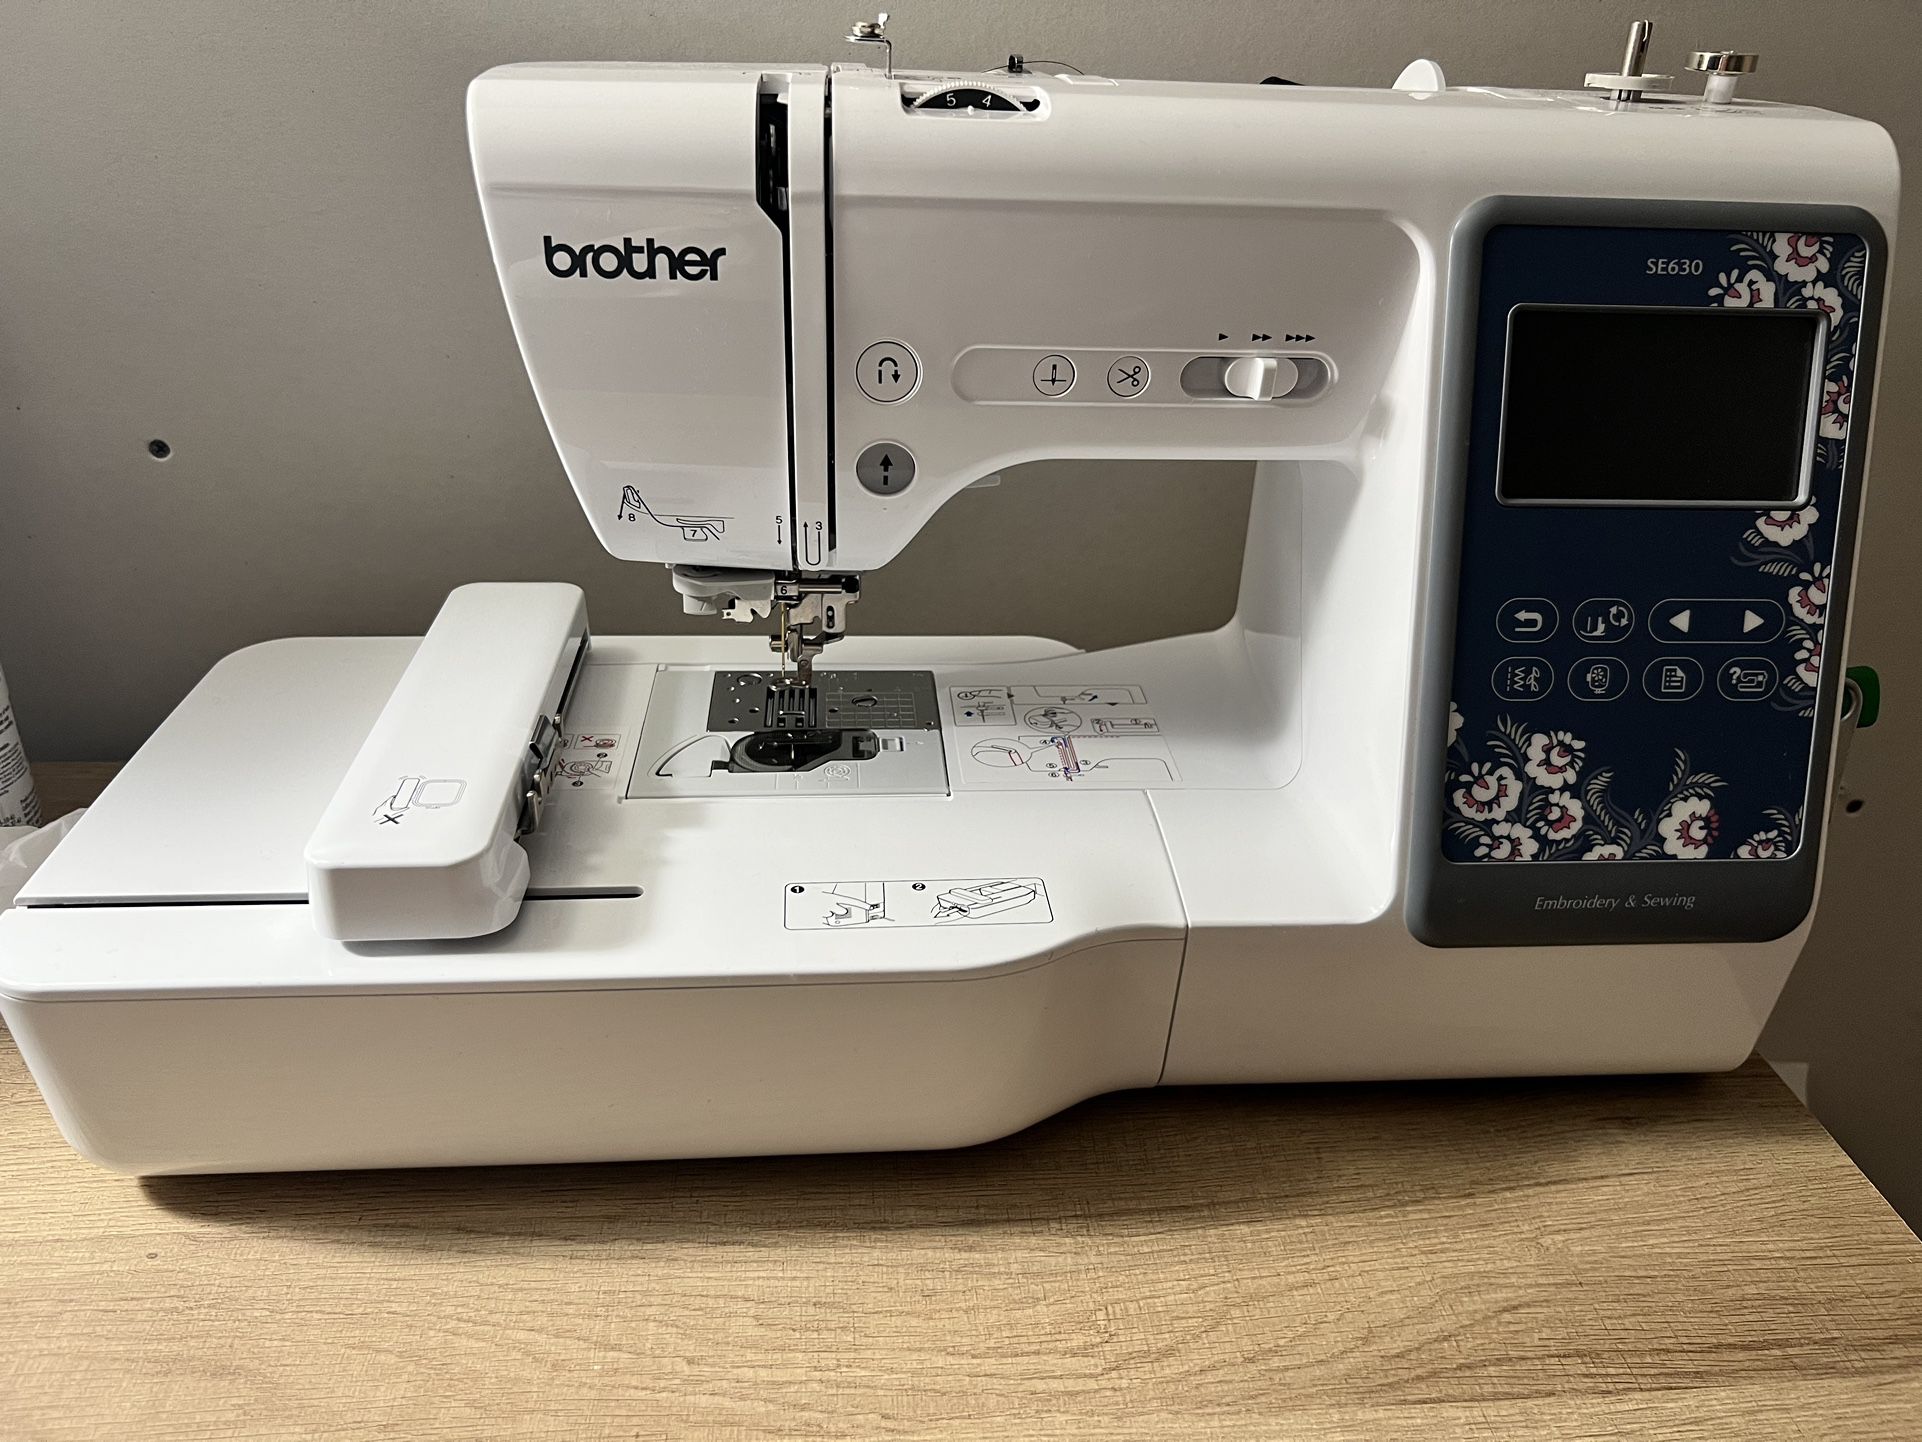 Brother SE630 Embroidery Sewing Machine for Sale in San Gabriel